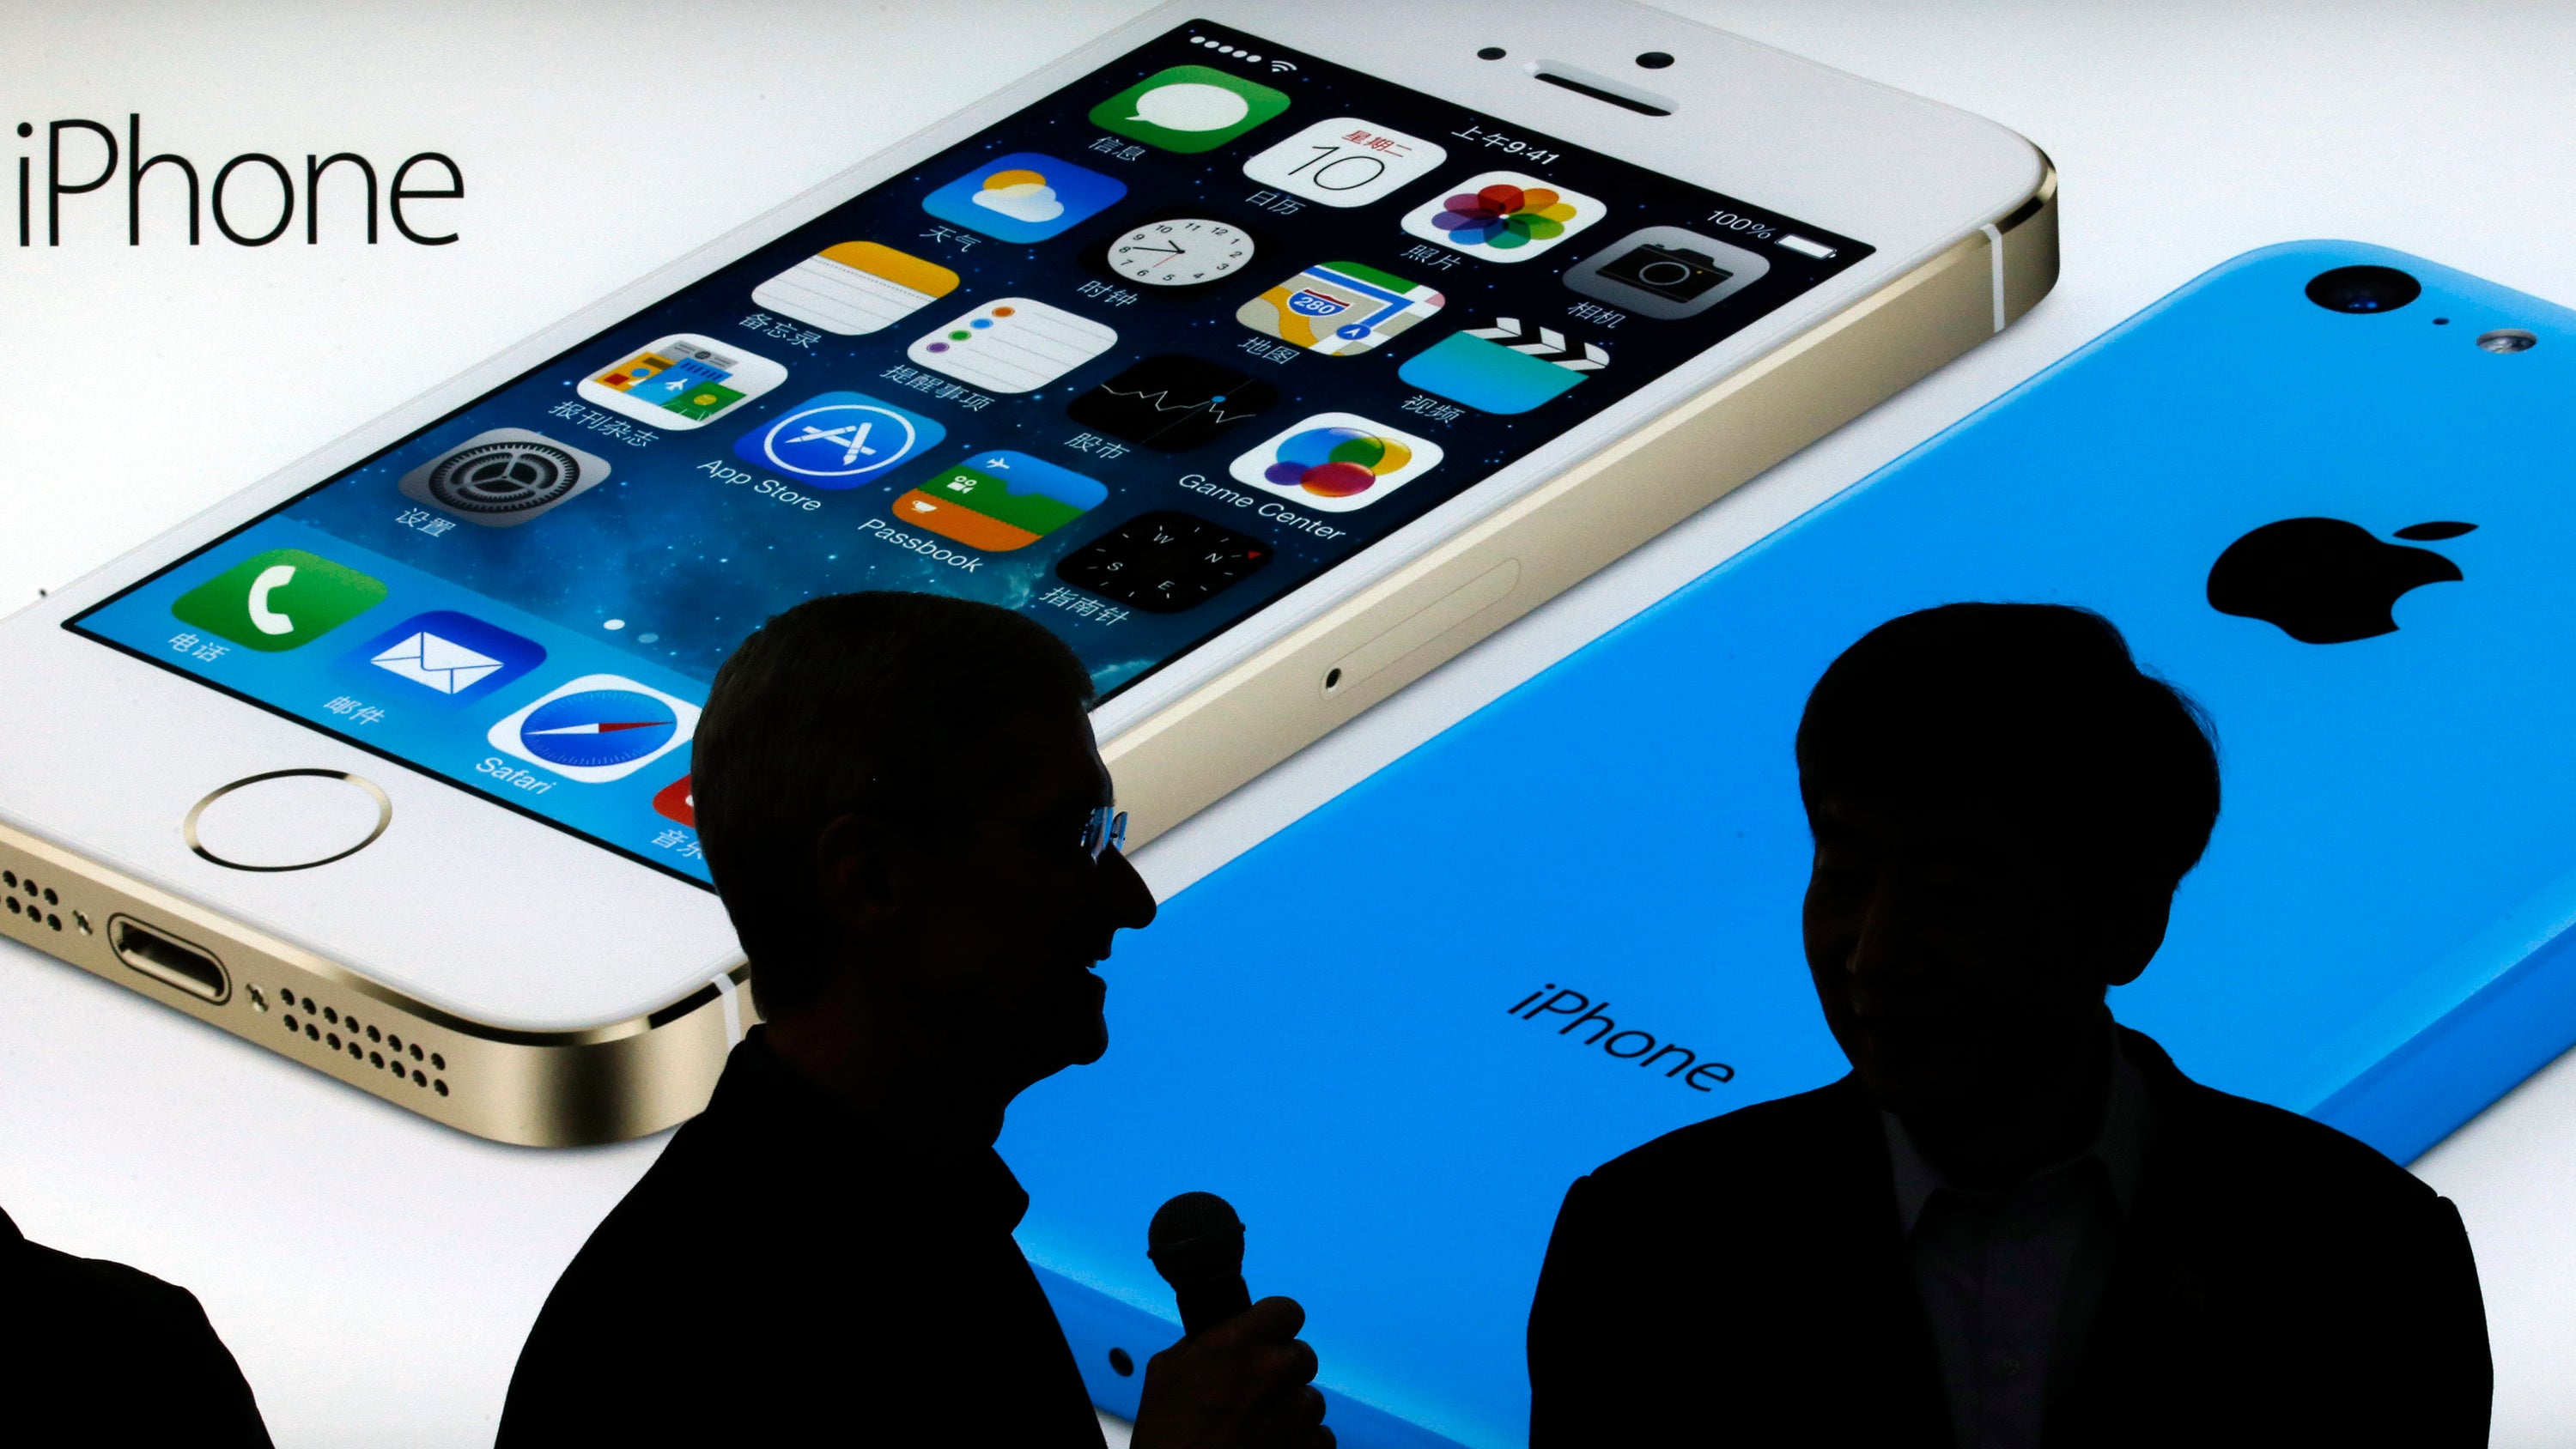 The iPhone 6 is expected to be unveiled by Apple on September 9th.